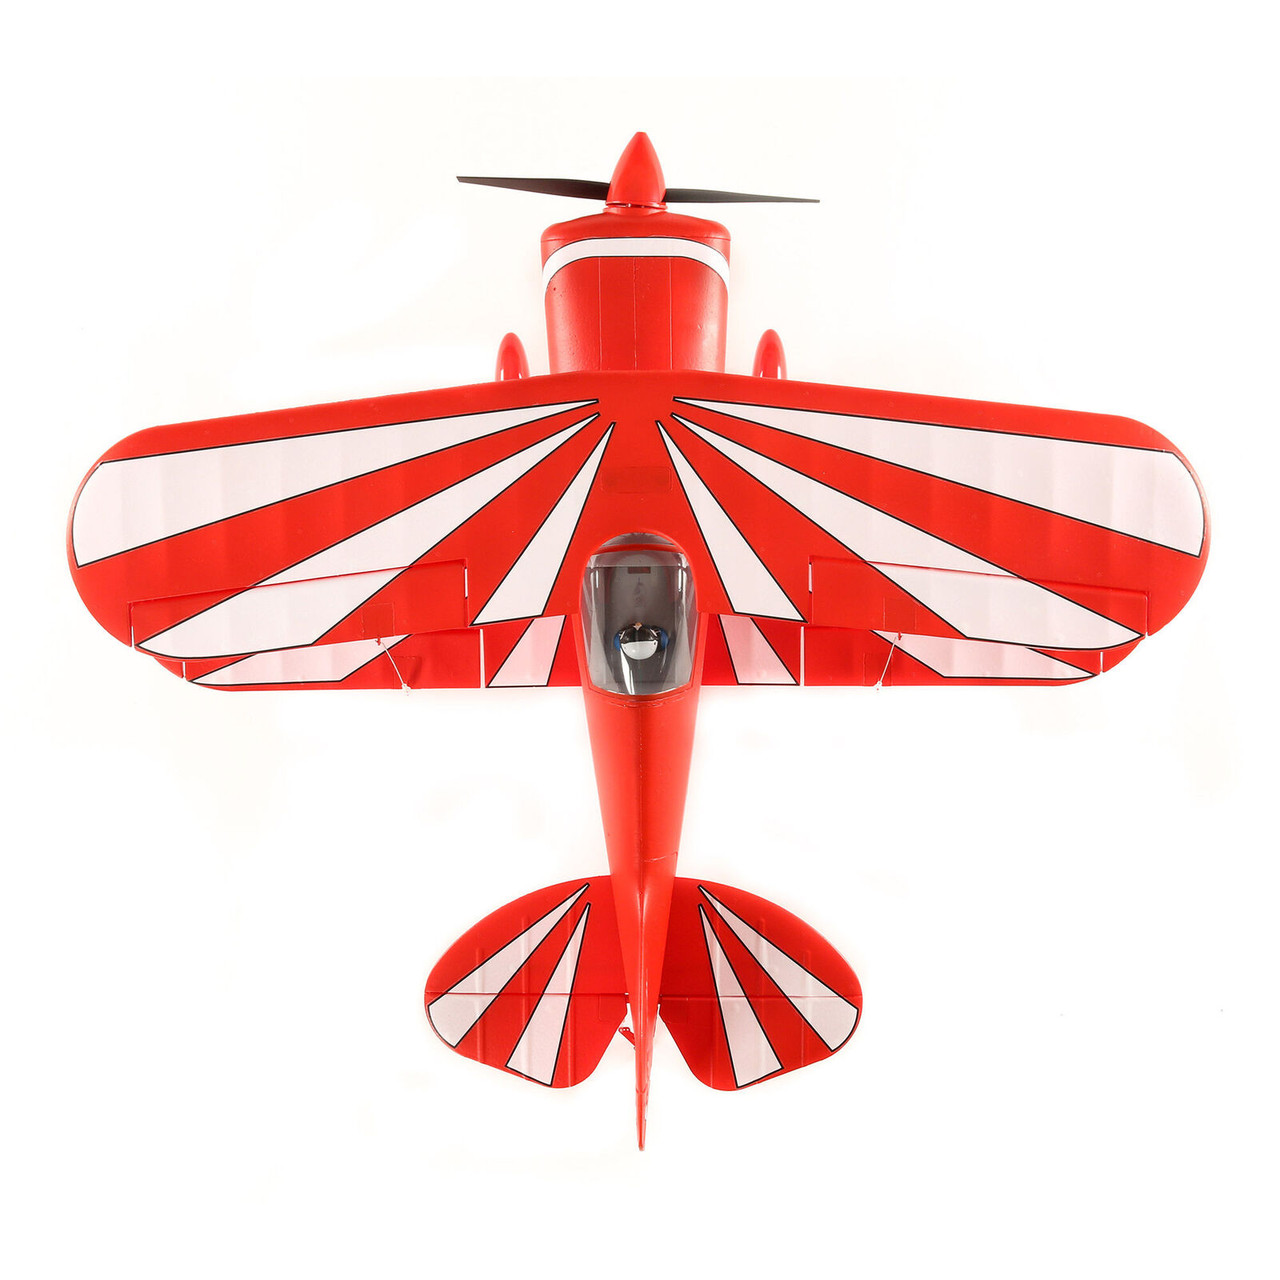 Eflite Pitts S-1S BNF Basic with AS3X and SAFE Select, 850mm